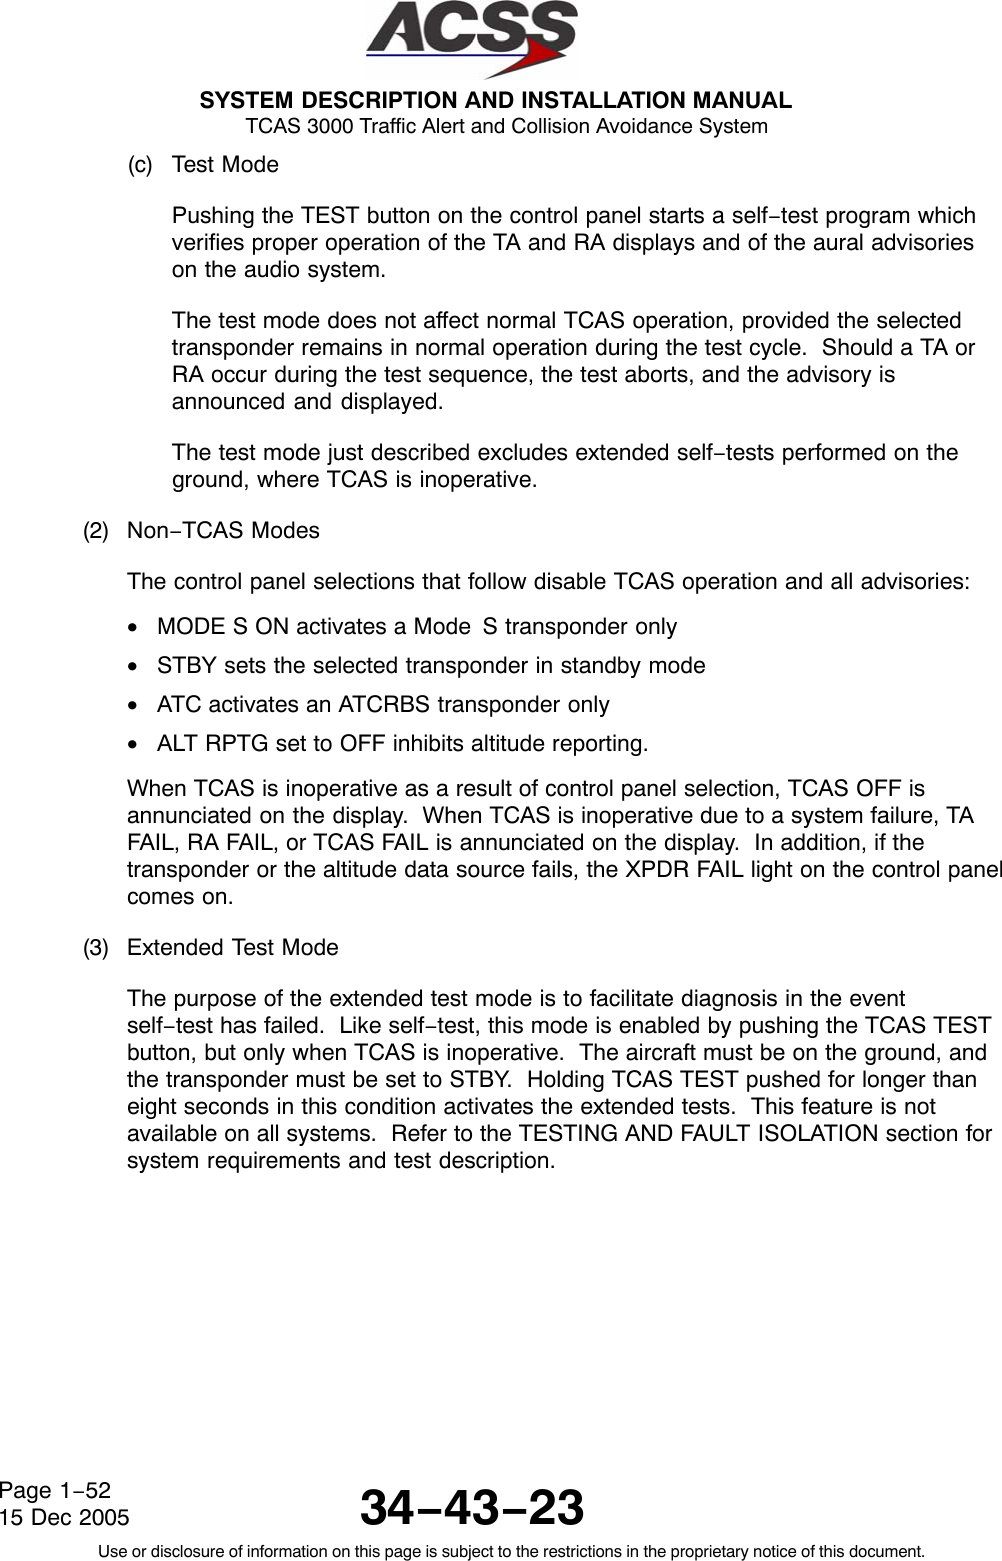  SYSTEM DESCRIPTION AND INSTALLATION MANUAL TCAS 3000 Traffic Alert and Collision Avoidance System34−43−23Use or disclosure of information on this page is subject to the restrictions in the proprietary notice of this document.Page 1−5215 Dec 2005(c) Test ModePushing the TEST button on the control panel starts a self−test program whichverifies proper operation of the TA and RA displays and of the aural advisorieson the audio system.The test mode does not affect normal TCAS operation, provided the selectedtransponder remains in normal operation during the test cycle.  Should a TA orRA occur during the test sequence, the test aborts, and the advisory isannounced and displayed.The test mode just described excludes extended self−tests performed on theground, where TCAS is inoperative.(2) Non−TCAS ModesThe control panel selections that follow disable TCAS operation and all advisories:•MODE S ON activates a Mode S transponder only•STBY sets the selected transponder in standby mode•ATC activates an ATCRBS transponder only•ALT RPTG set to OFF inhibits altitude reporting.When TCAS is inoperative as a result of control panel selection, TCAS OFF isannunciated on the display.  When TCAS is inoperative due to a system failure, TAFAIL, RA FAIL, or TCAS FAIL is annunciated on the display.  In addition, if thetransponder or the altitude data source fails, the XPDR FAIL light on the control panelcomes on.(3) Extended Test ModeThe purpose of the extended test mode is to facilitate diagnosis in the eventself−test has failed.  Like self−test, this mode is enabled by pushing the TCAS TESTbutton, but only when TCAS is inoperative.  The aircraft must be on the ground, andthe transponder must be set to STBY.  Holding TCAS TEST pushed for longer thaneight seconds in this condition activates the extended tests.  This feature is notavailable on all systems.  Refer to the TESTING AND FAULT ISOLATION section forsystem requirements and test description.